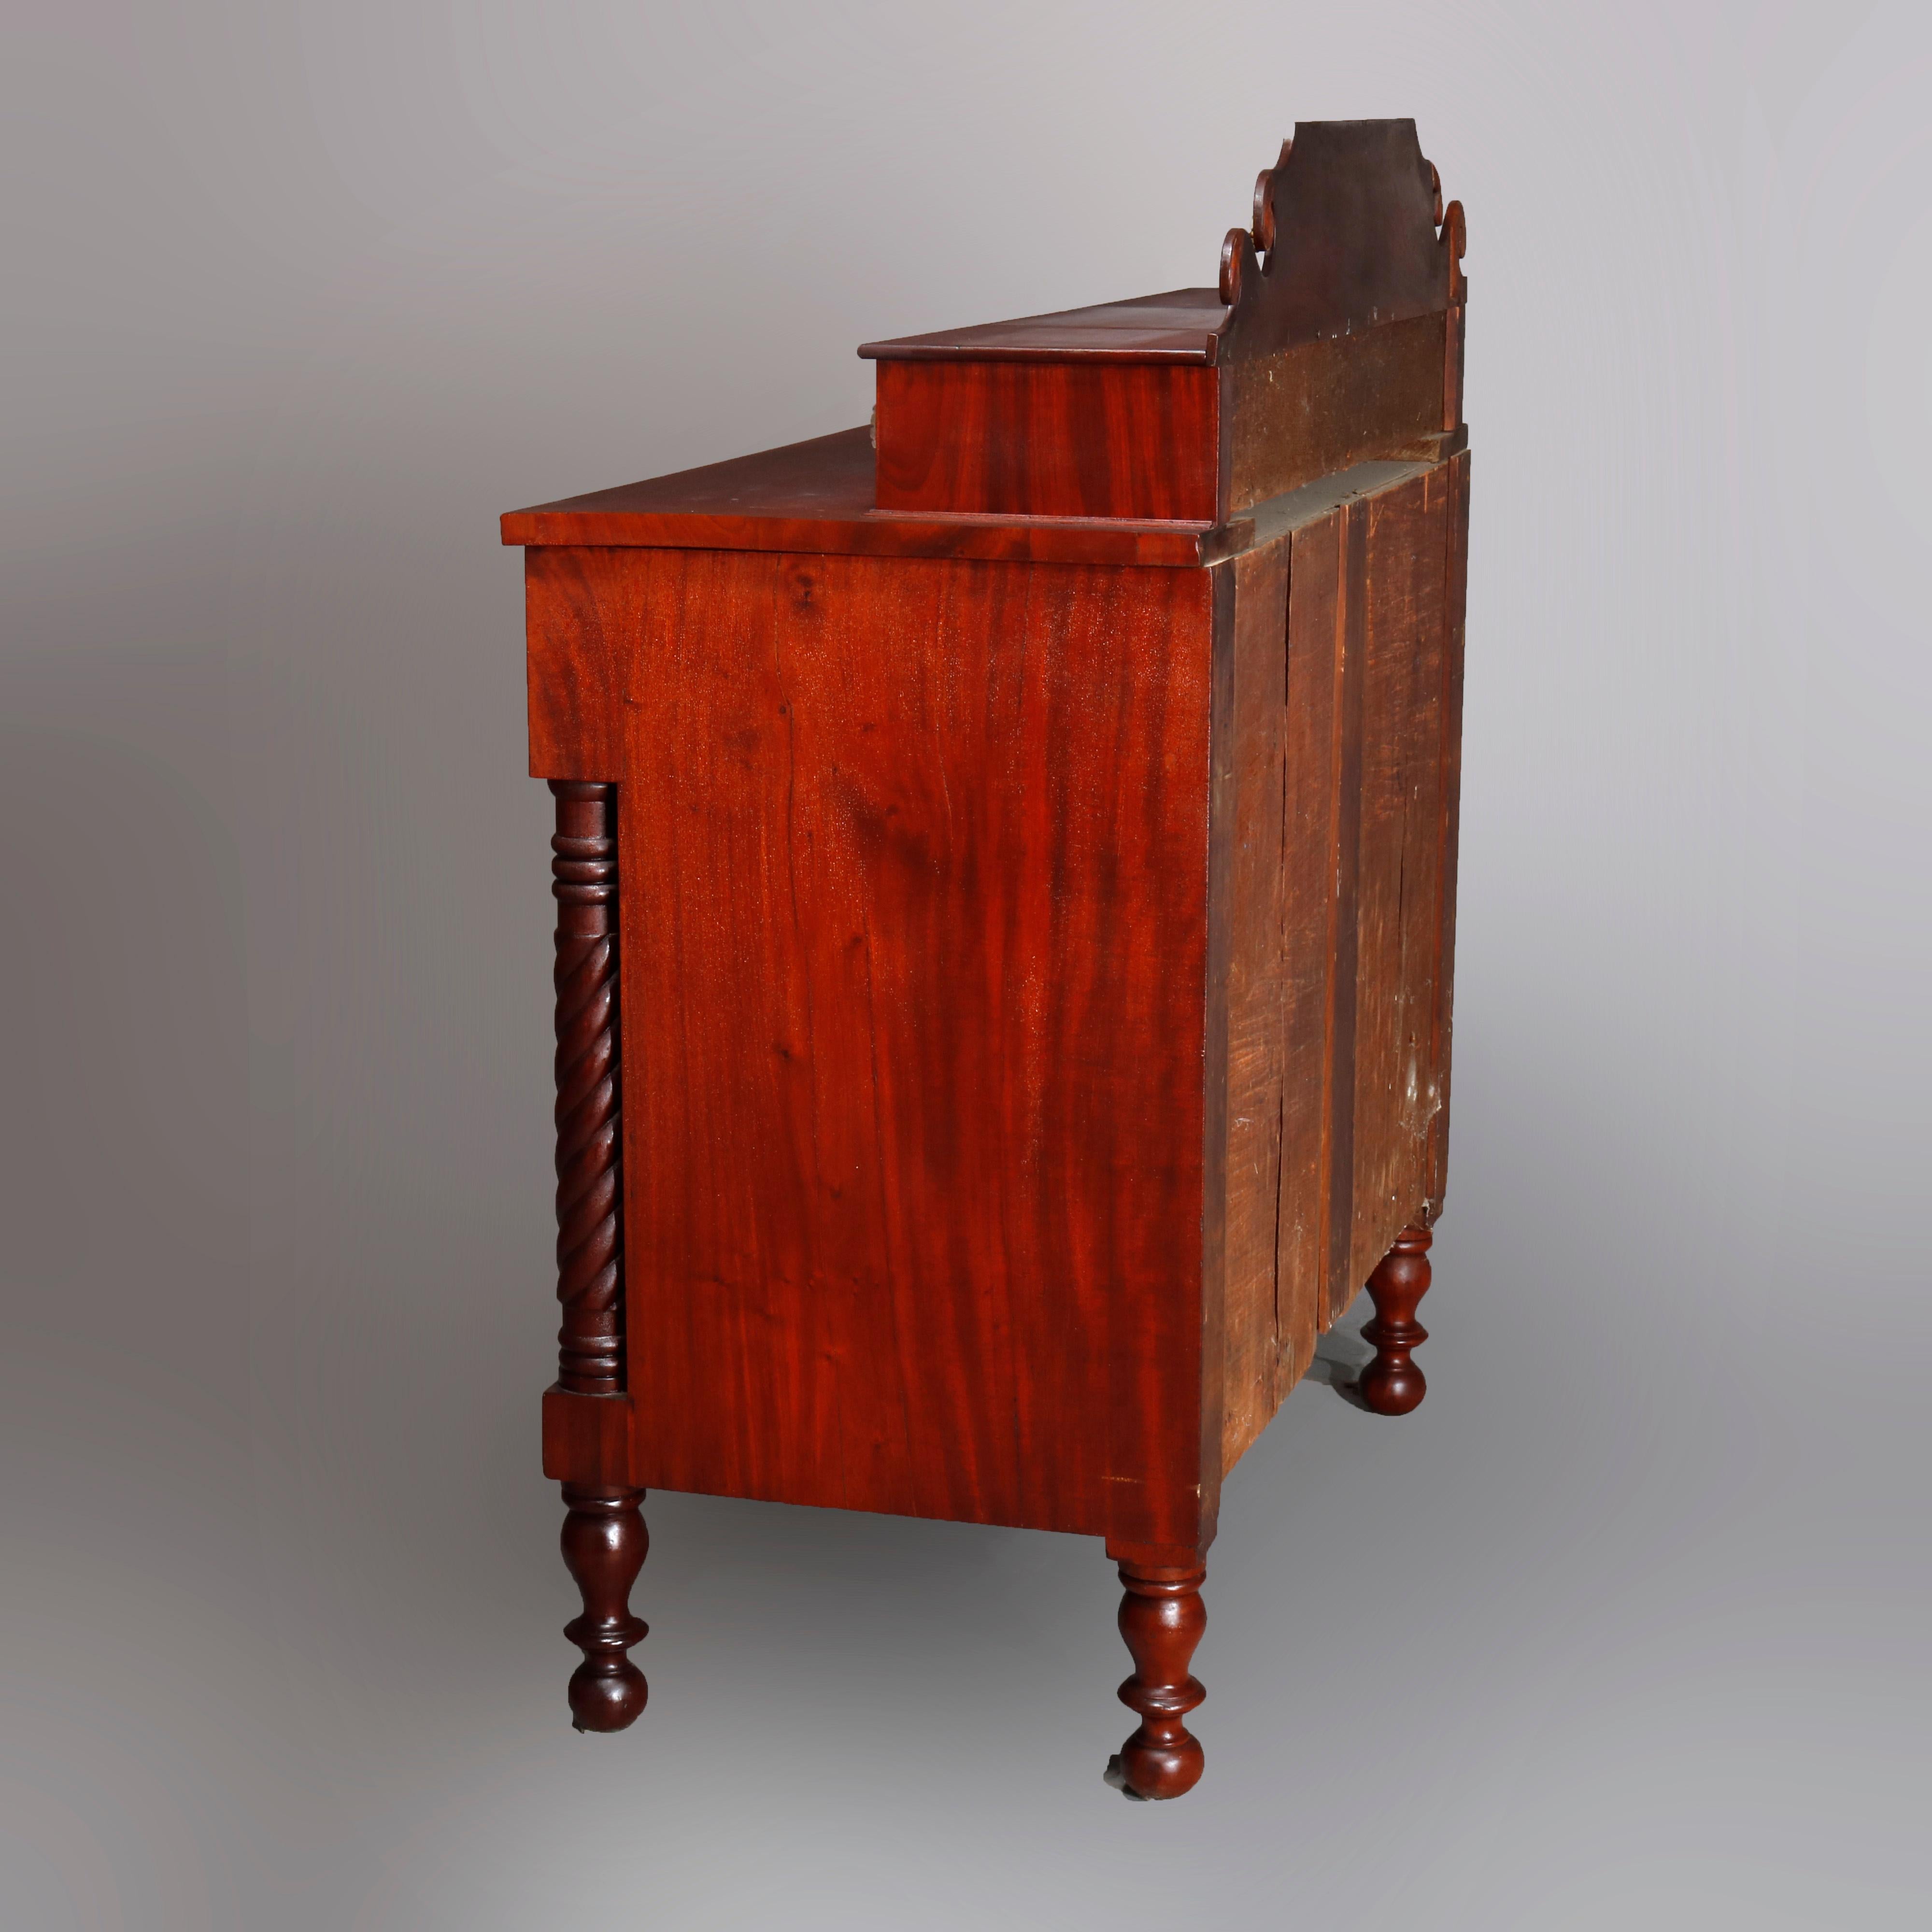 An antique American Empire chest of drawers offers flame mahogany construction with scrolled backsplash over case with three glove drawers, one oversized frieze drawer and three long drawers flanked by full twisted rope column supports, raised on